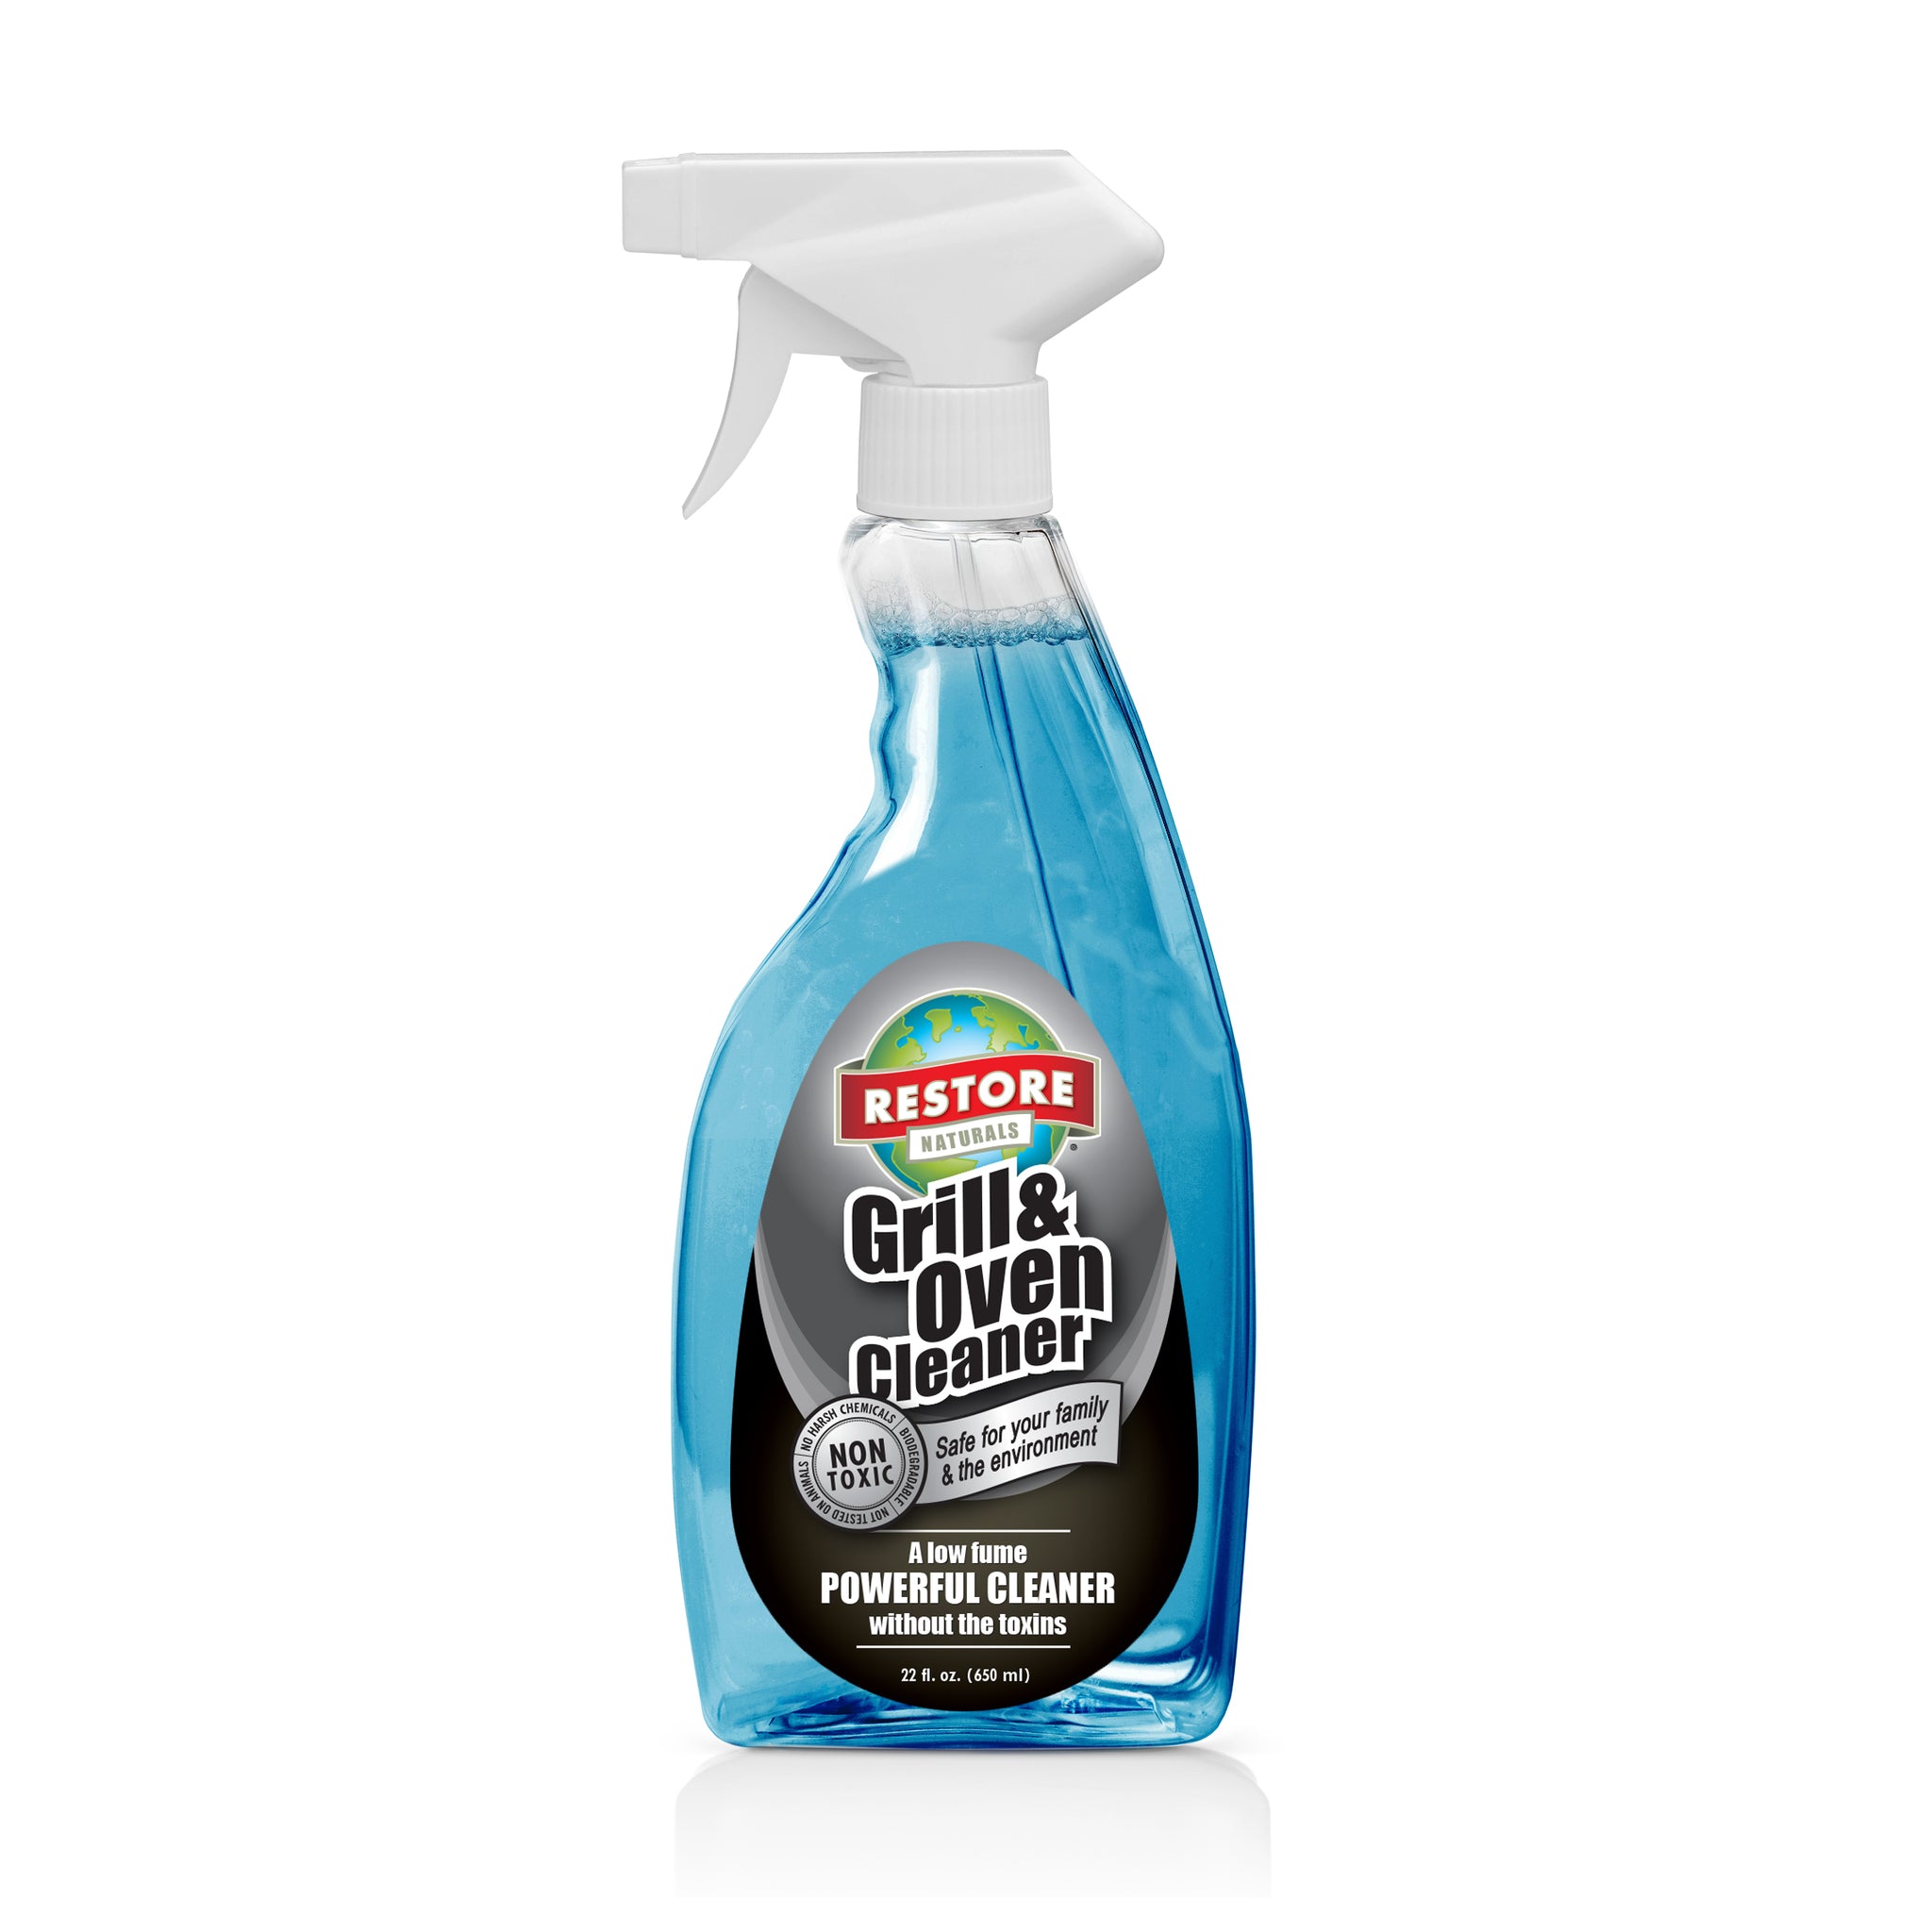 ALL NATURAL CLEANER SPRAY 950ML – Grillworks